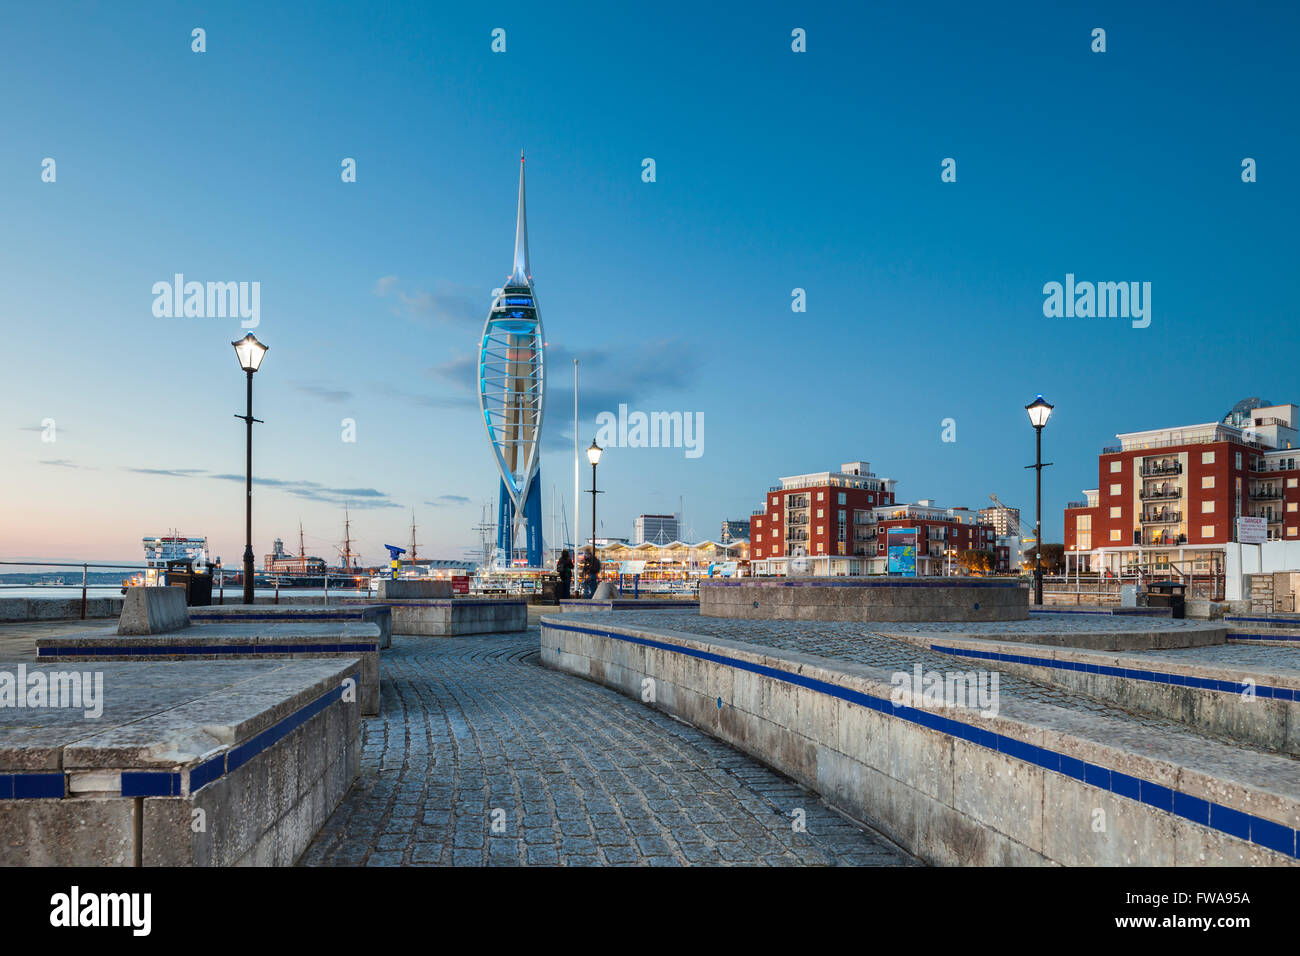 Night falls in Portsmouth, UK. Spinnaker tower in the distance. Stock Photo